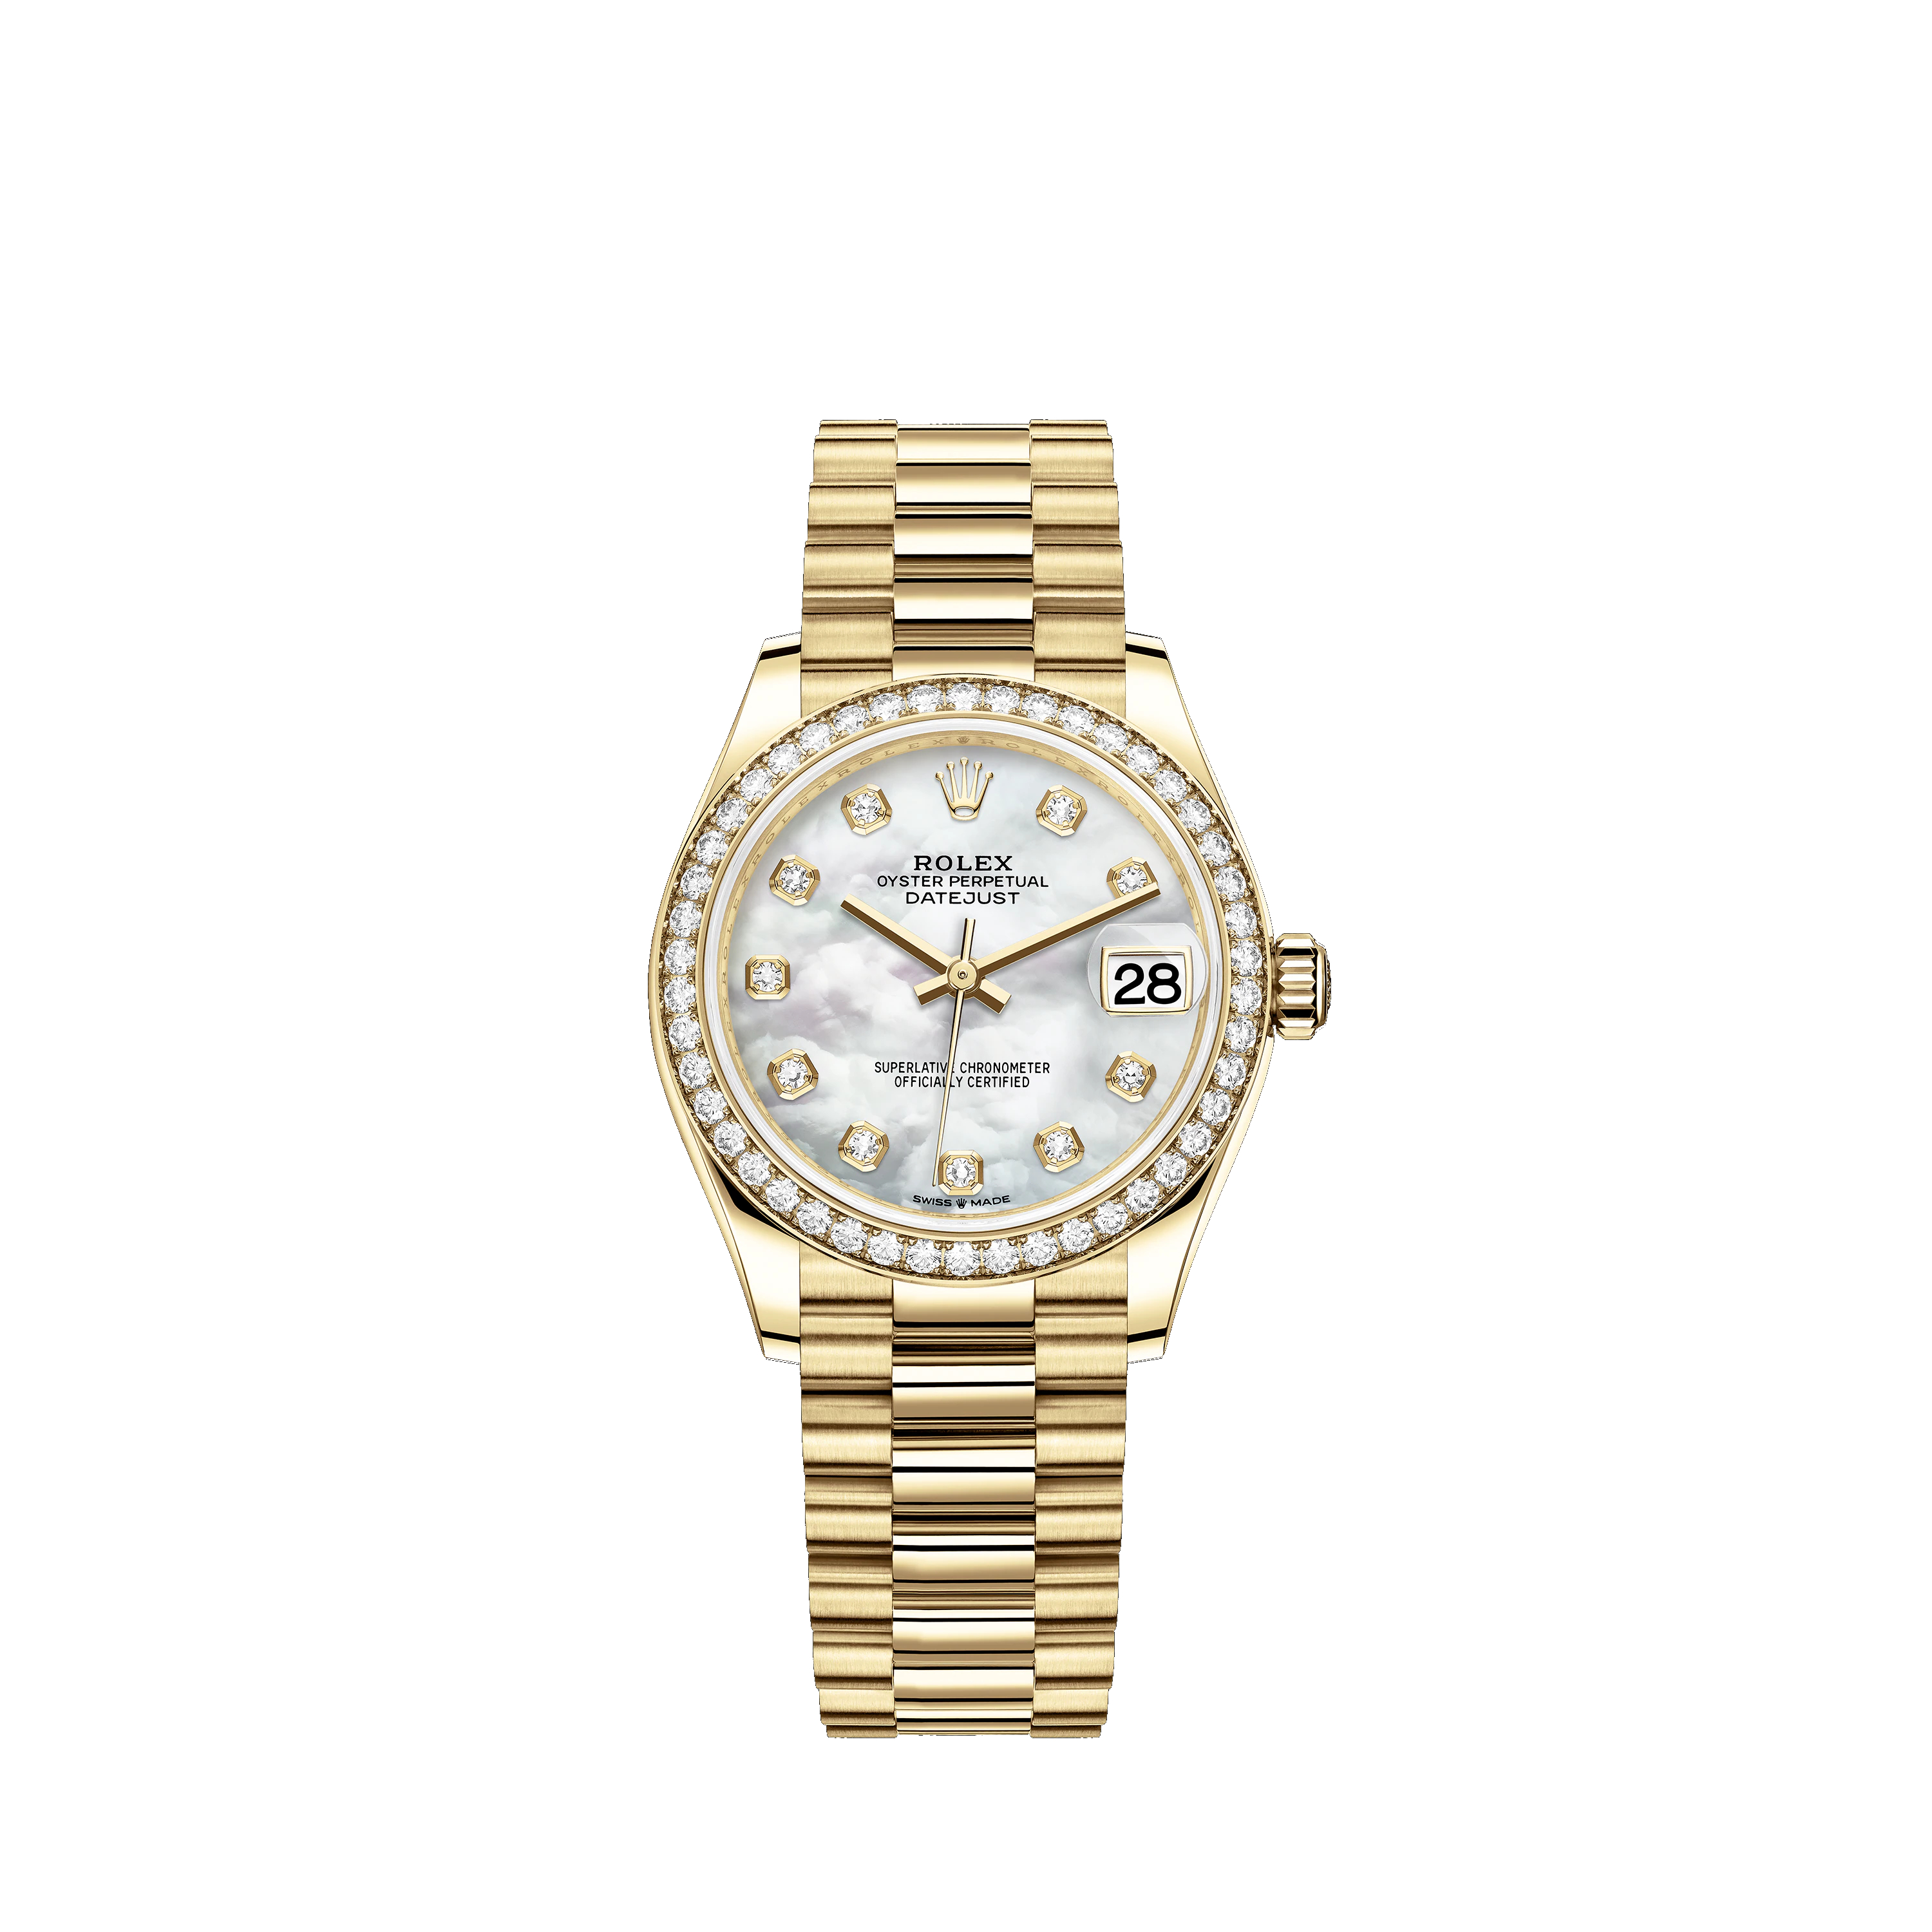 Datejust 31 278288RBR Gold & Diamonds Watch (White Mother-of-Pearl Set with Diamonds)